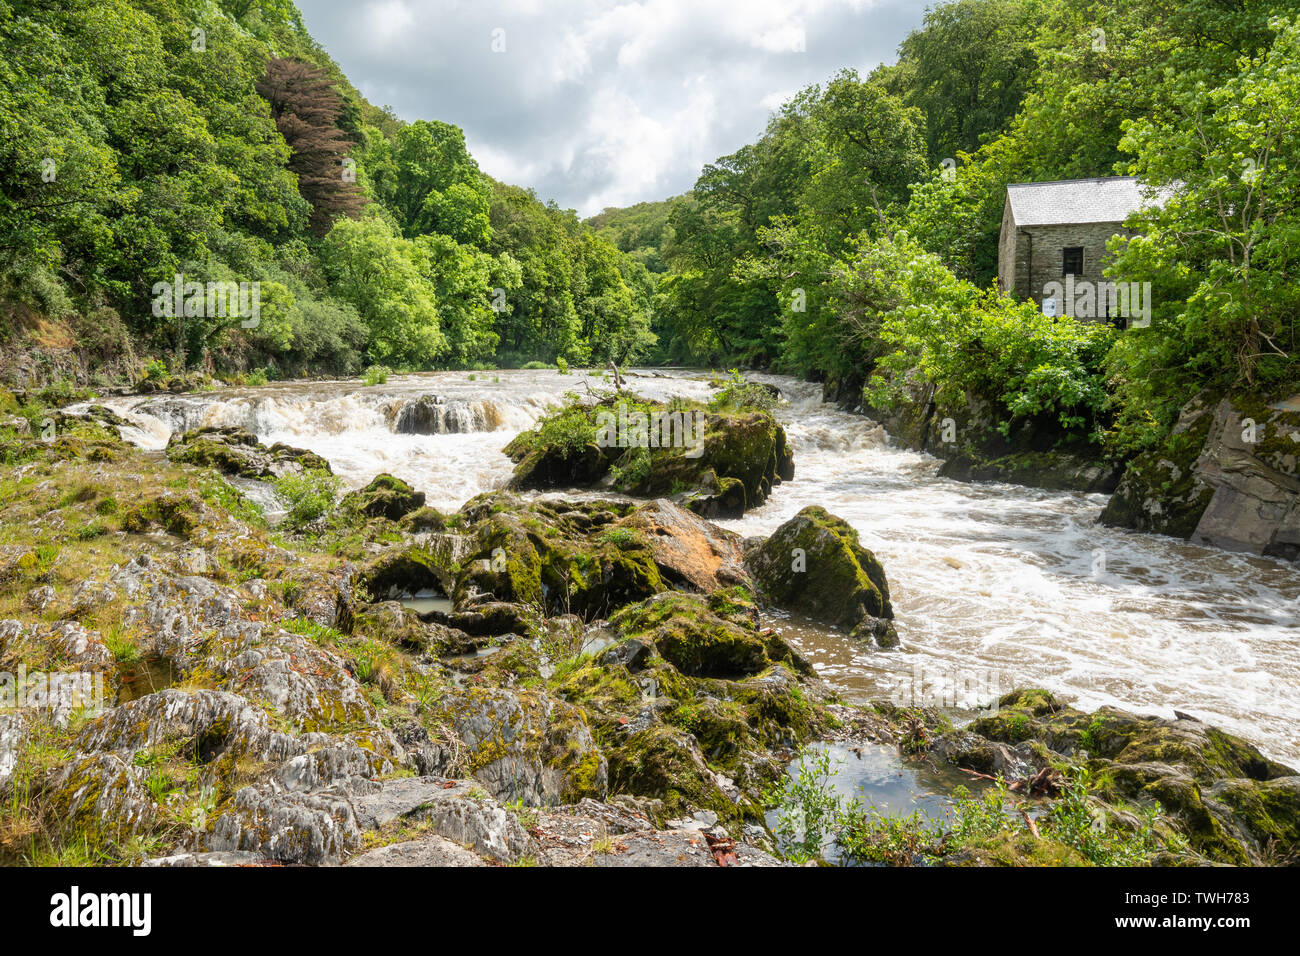 The falls (waterfalls) on the River Teifi at the village of Cenarth in Carmarthenshire, Wales, UK Stock Photo